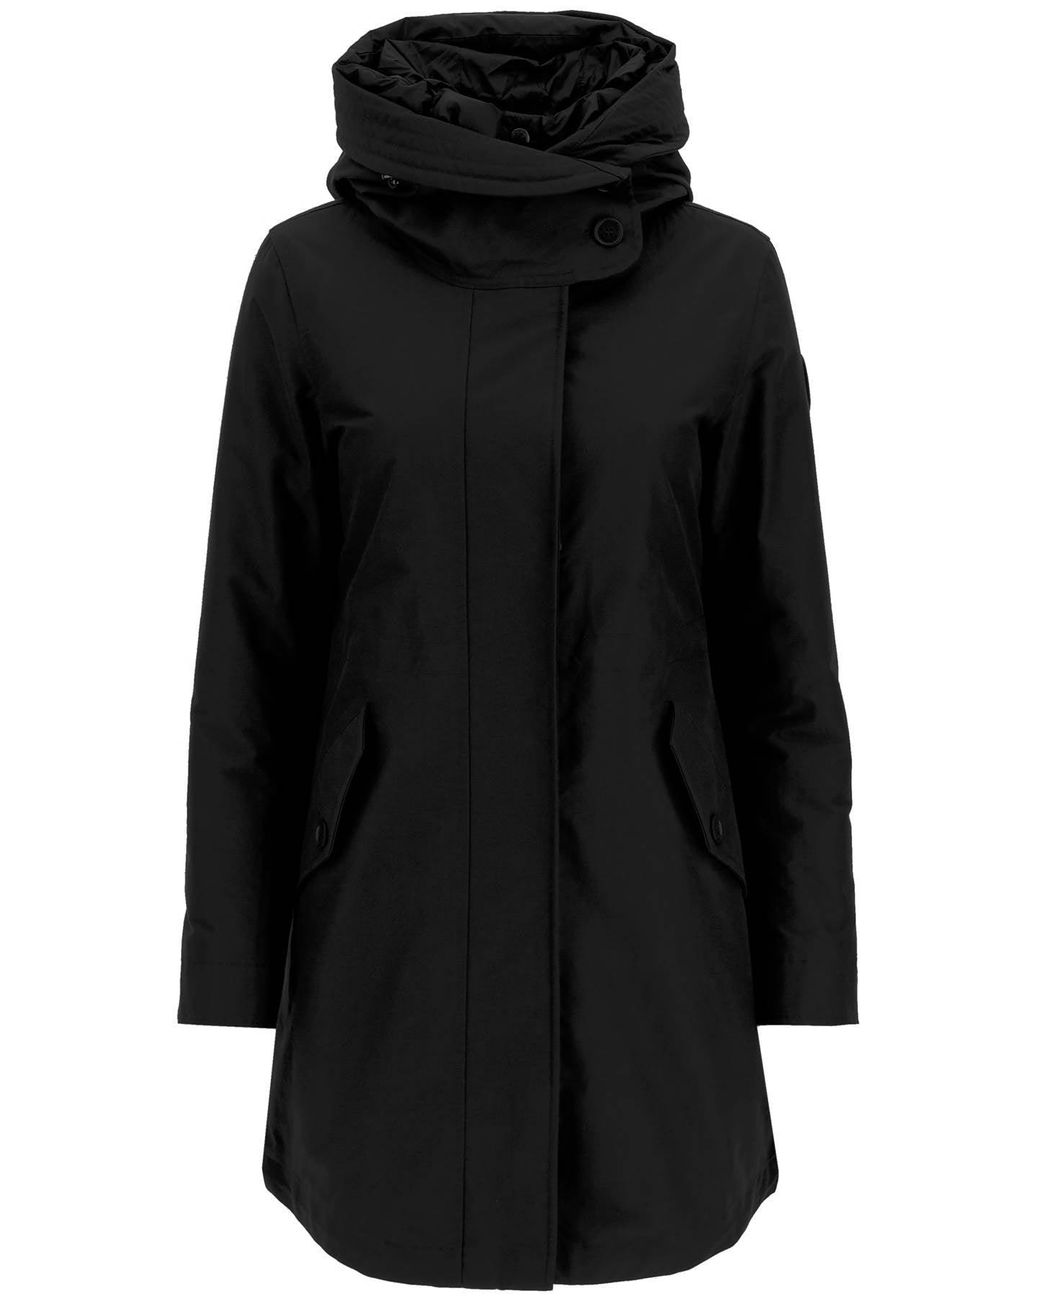 Long Military 3in1 Parka in Black Woolrich Womens Clothing Coats Parka coats 